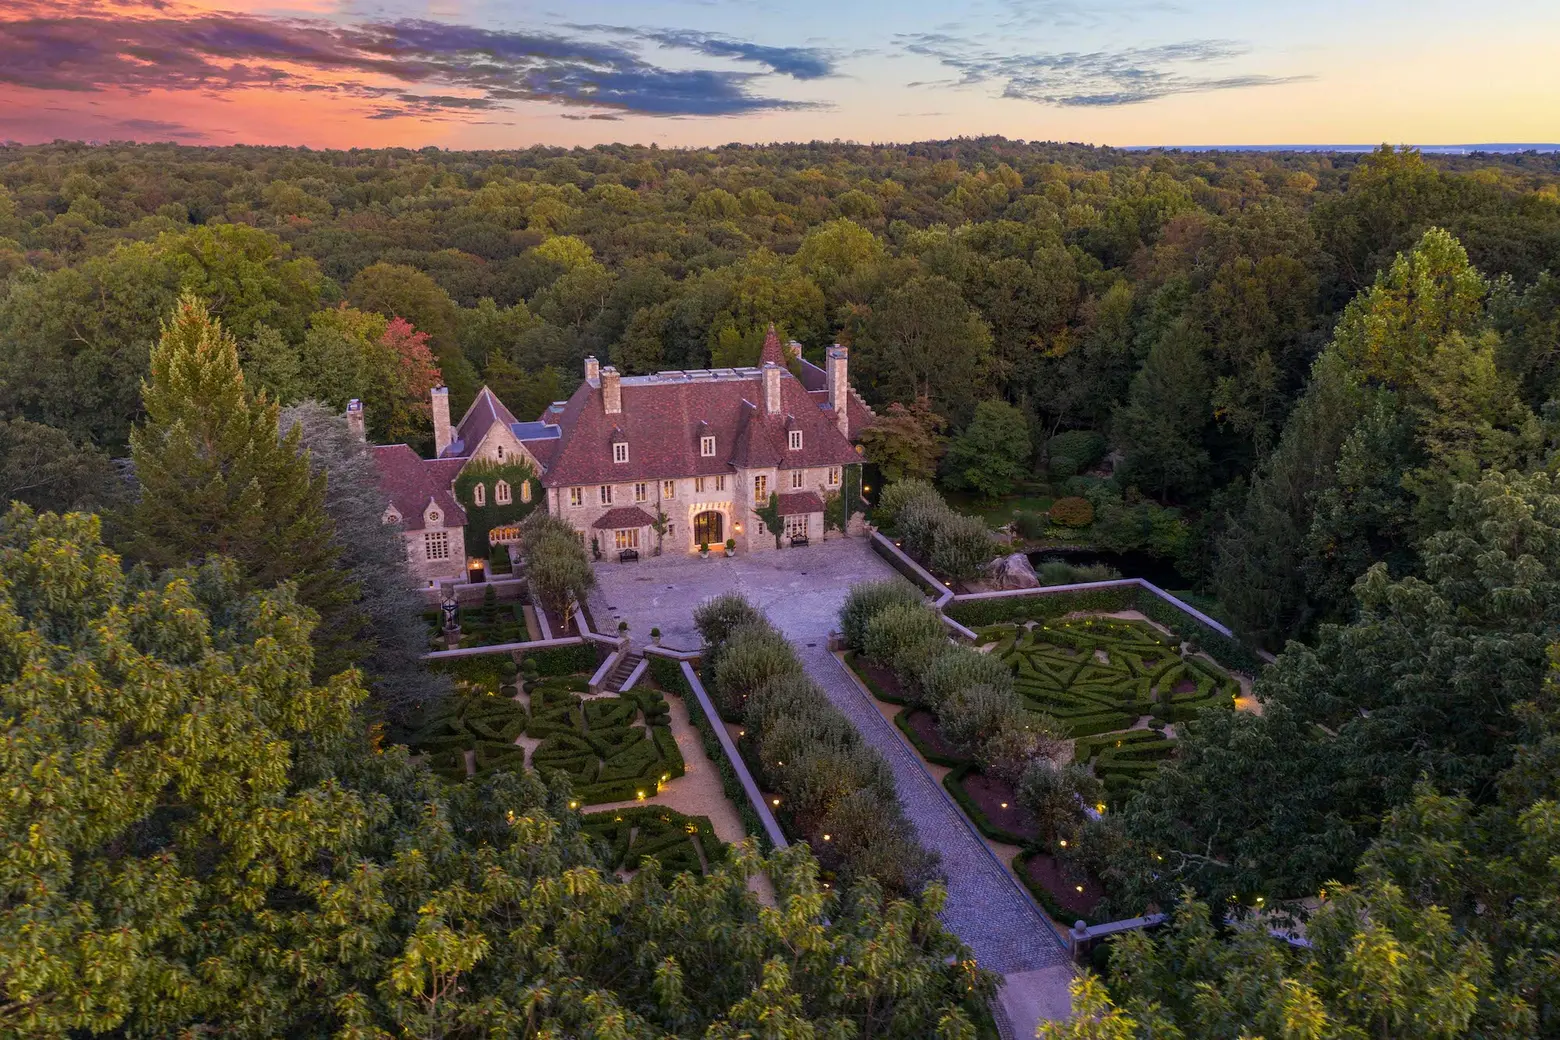 Late fashion designer Vince Camuto's Connecticut chateau is coming